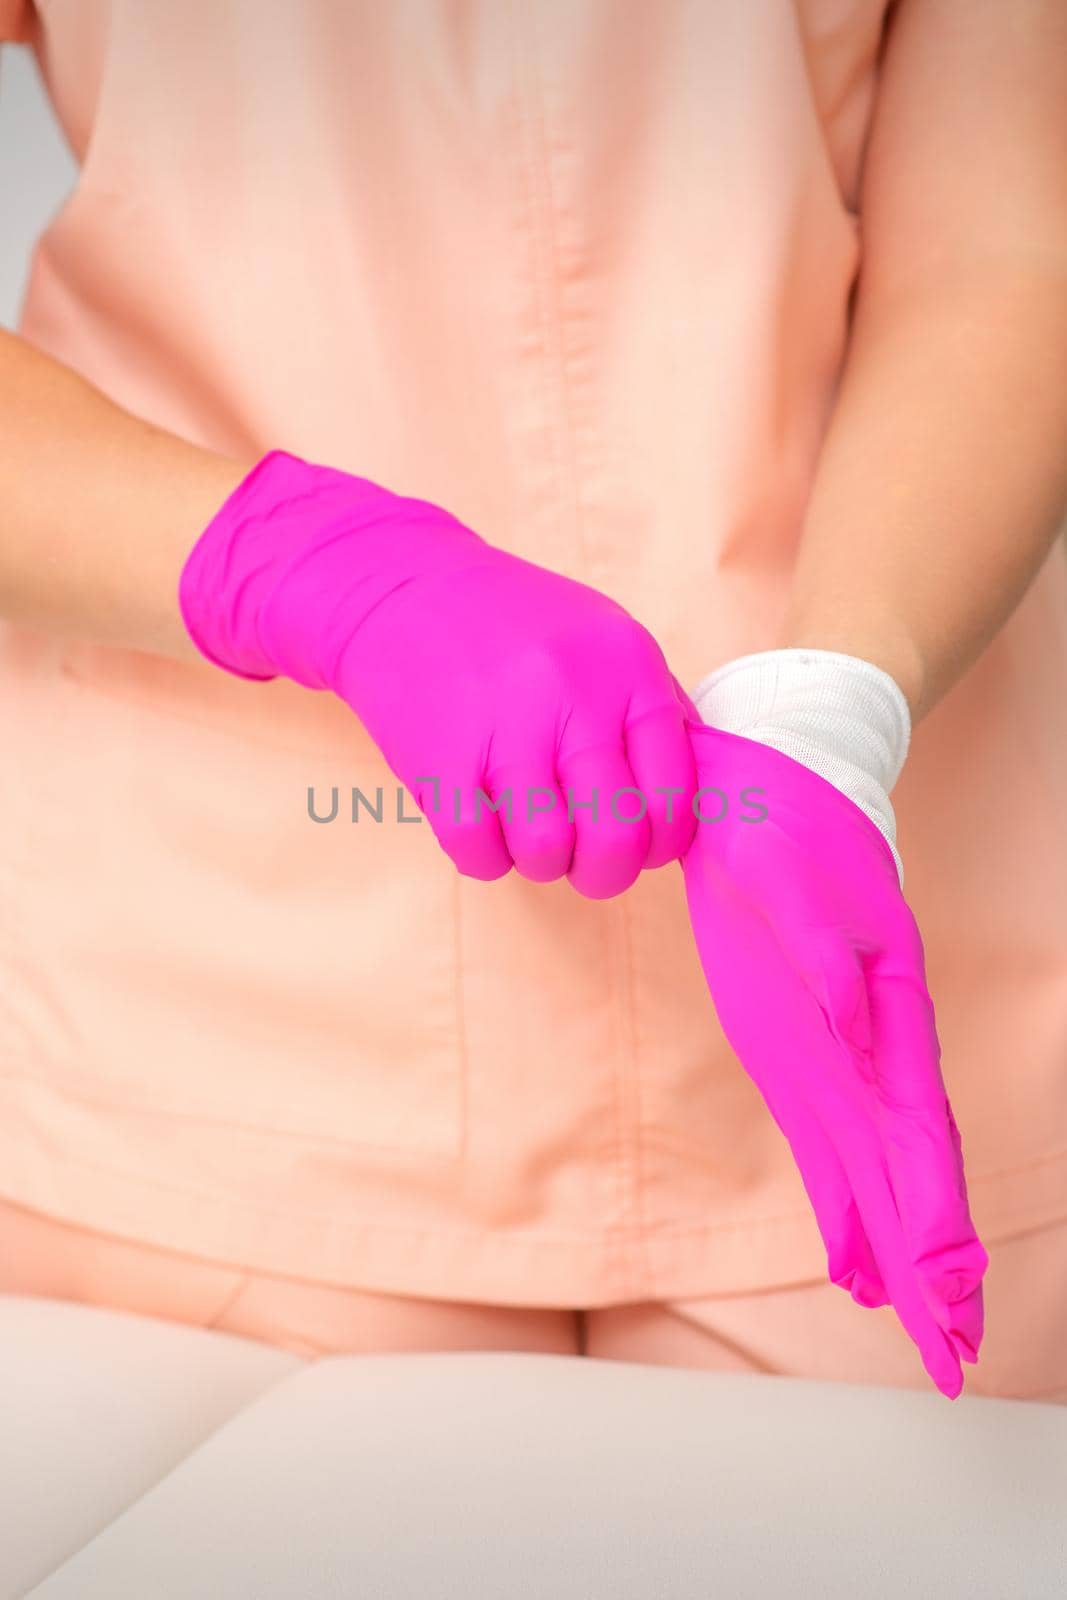 Hand of beautician puts on sterile pink gloves prepares to receive clients indoors. by okskukuruza